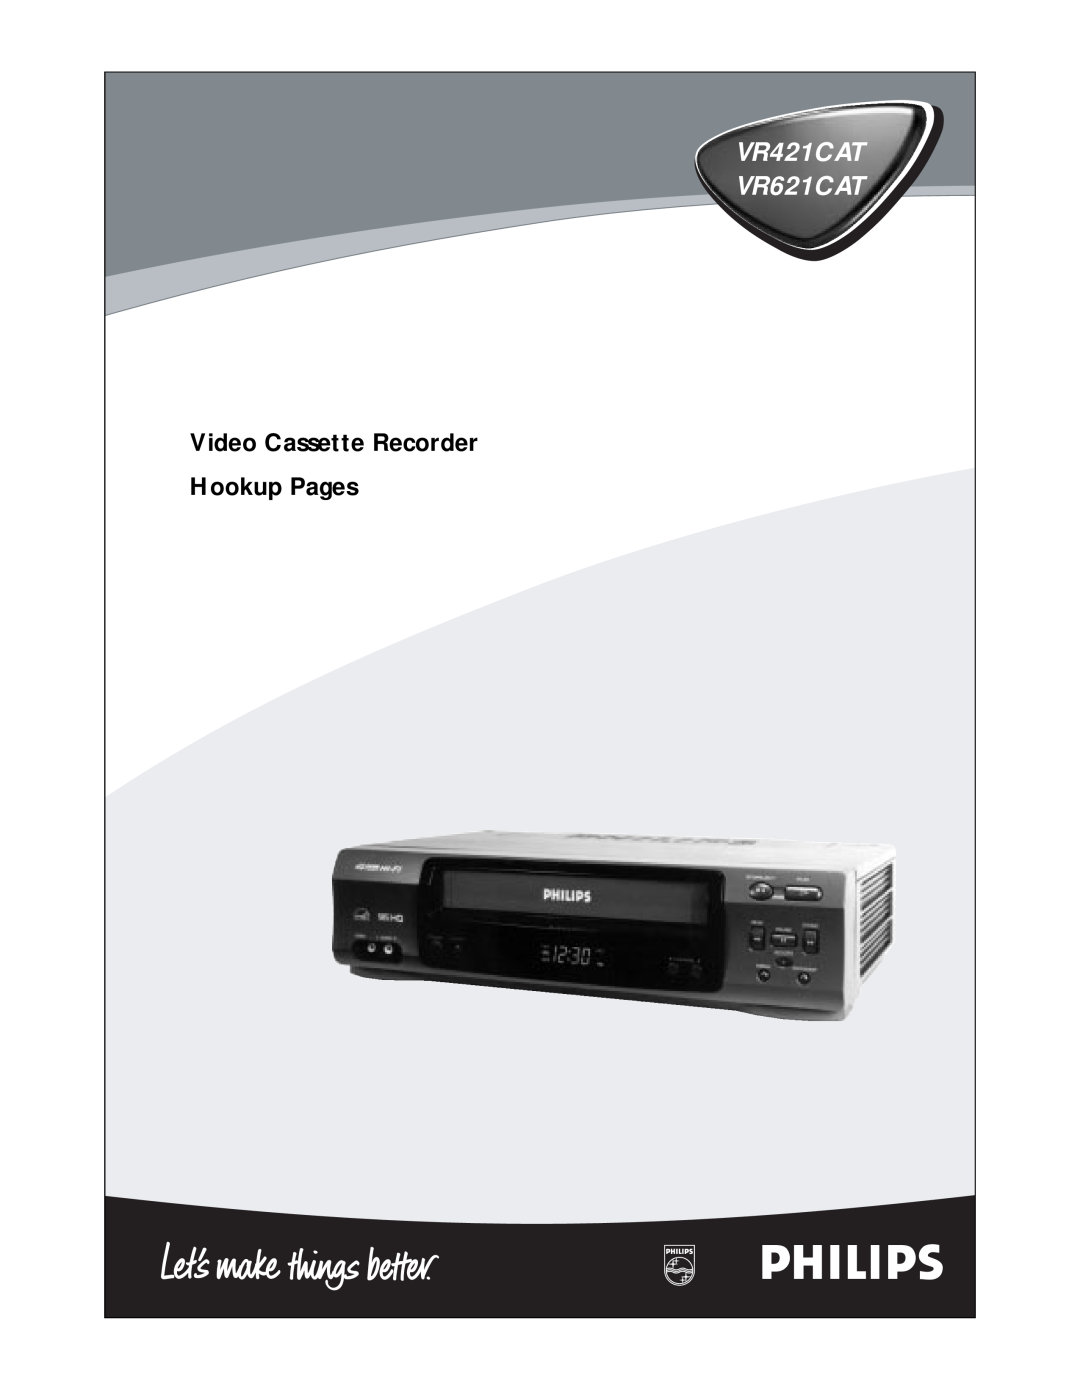 Philips manual Video Cassette Recorder Hookup Pages, VR421CAT VR621CAT 